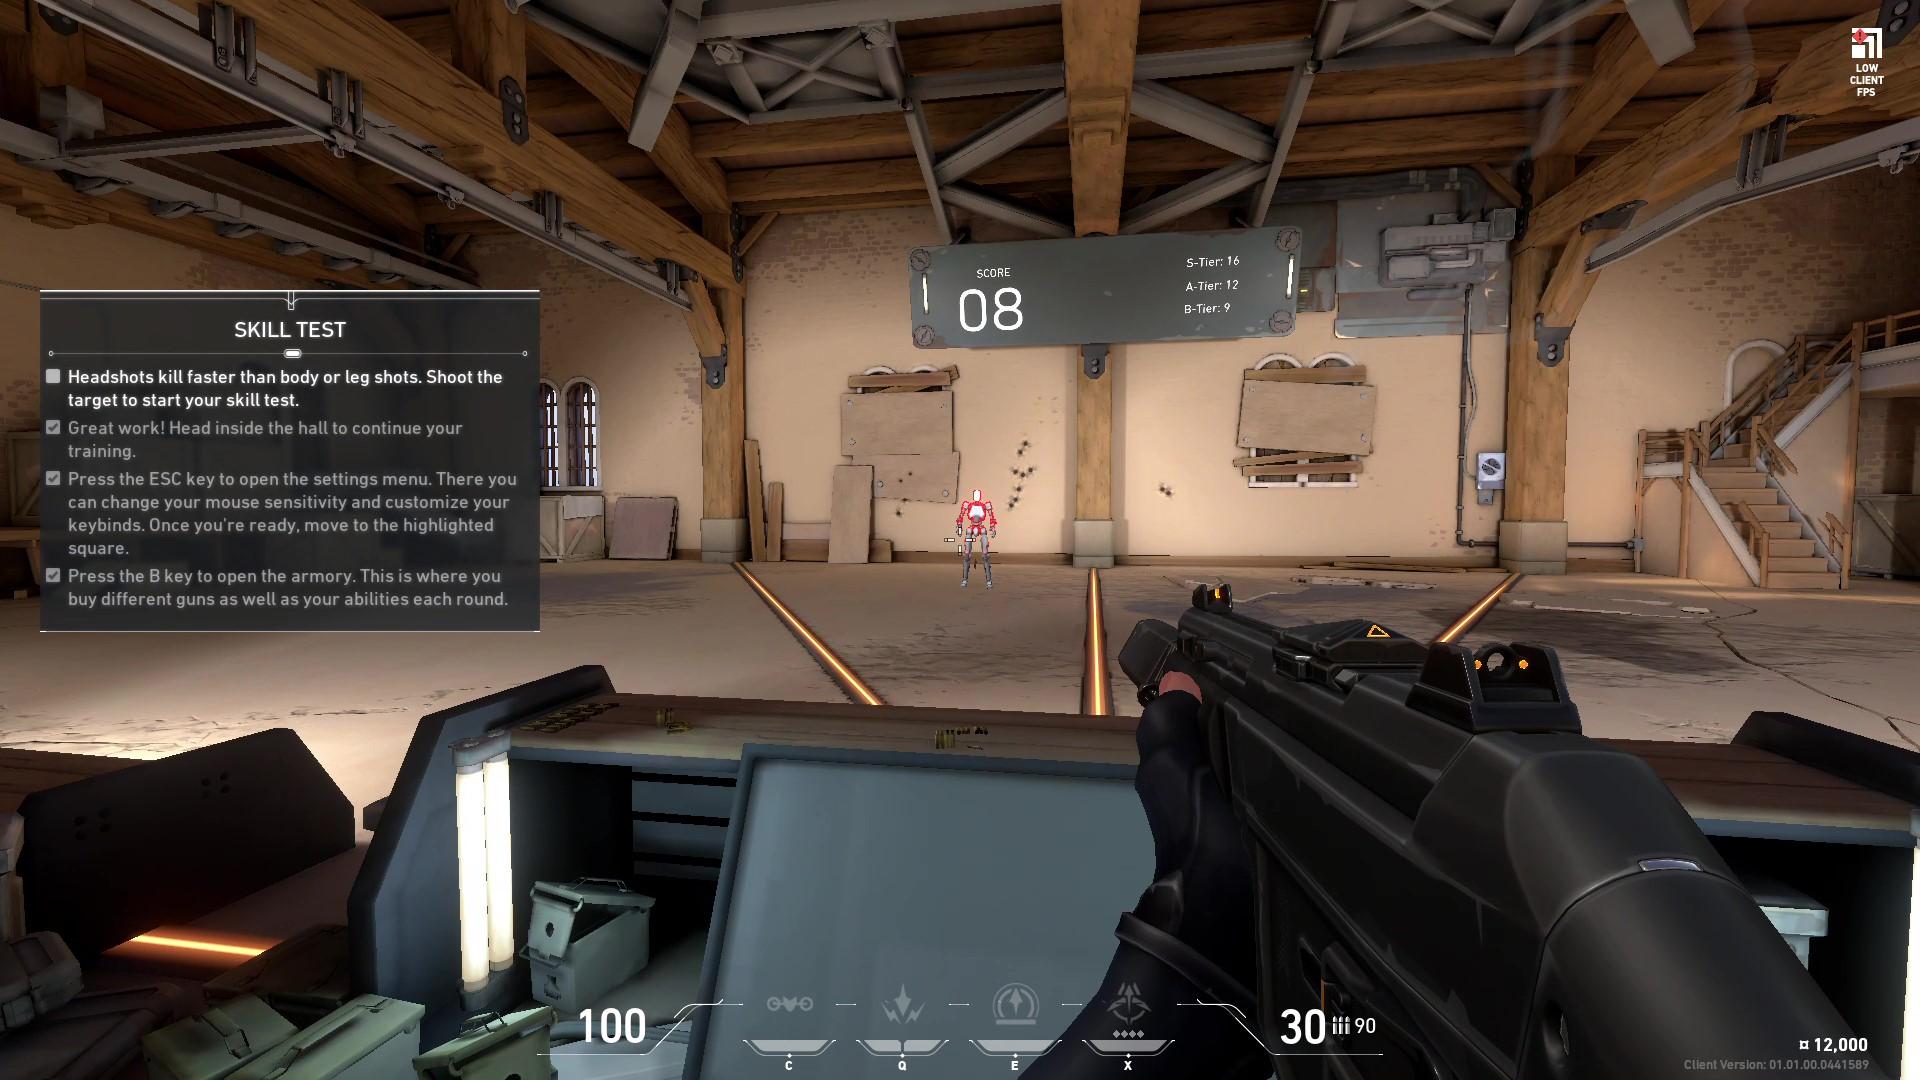 Test your skills at The Range in Valorant when you first jump in.